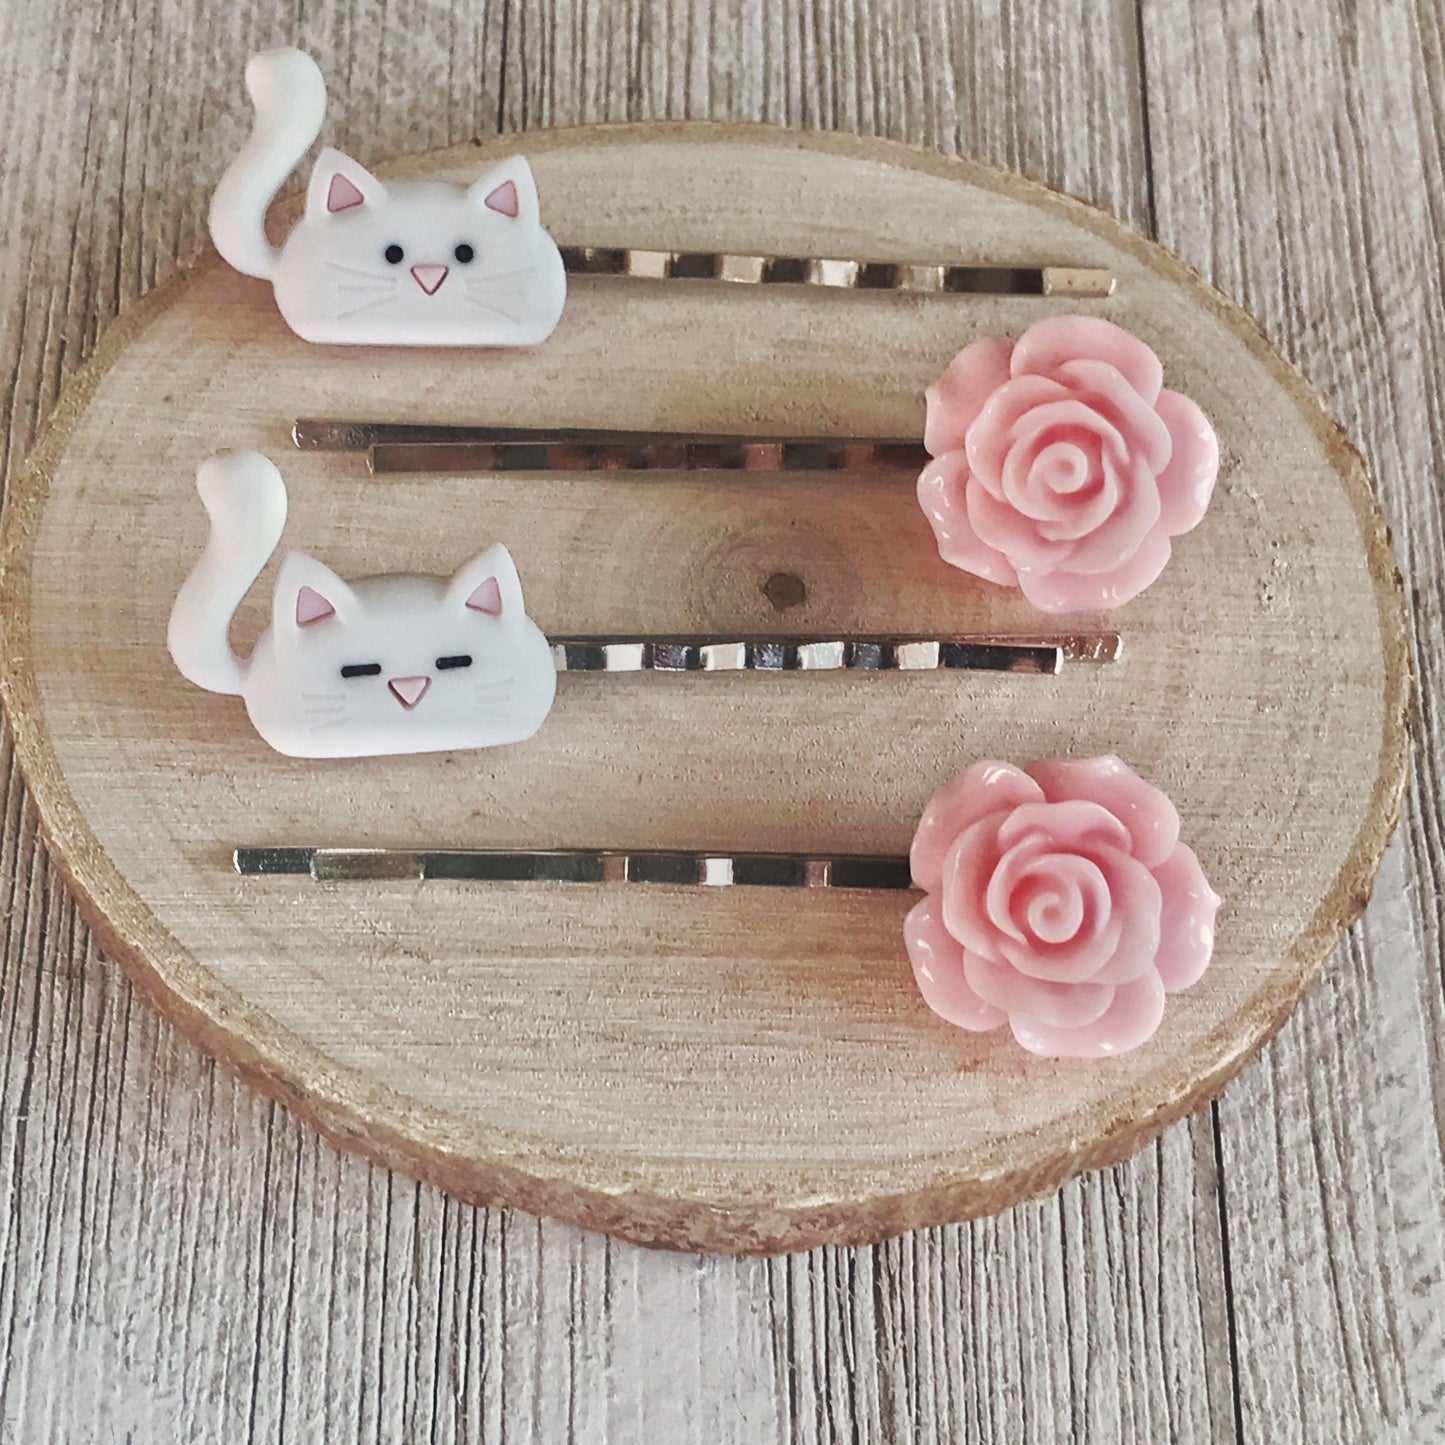 White Cats & Pink Flower Hair Pin Set- Charming Accessories for Cat Lovers & Floral Enthusiasts